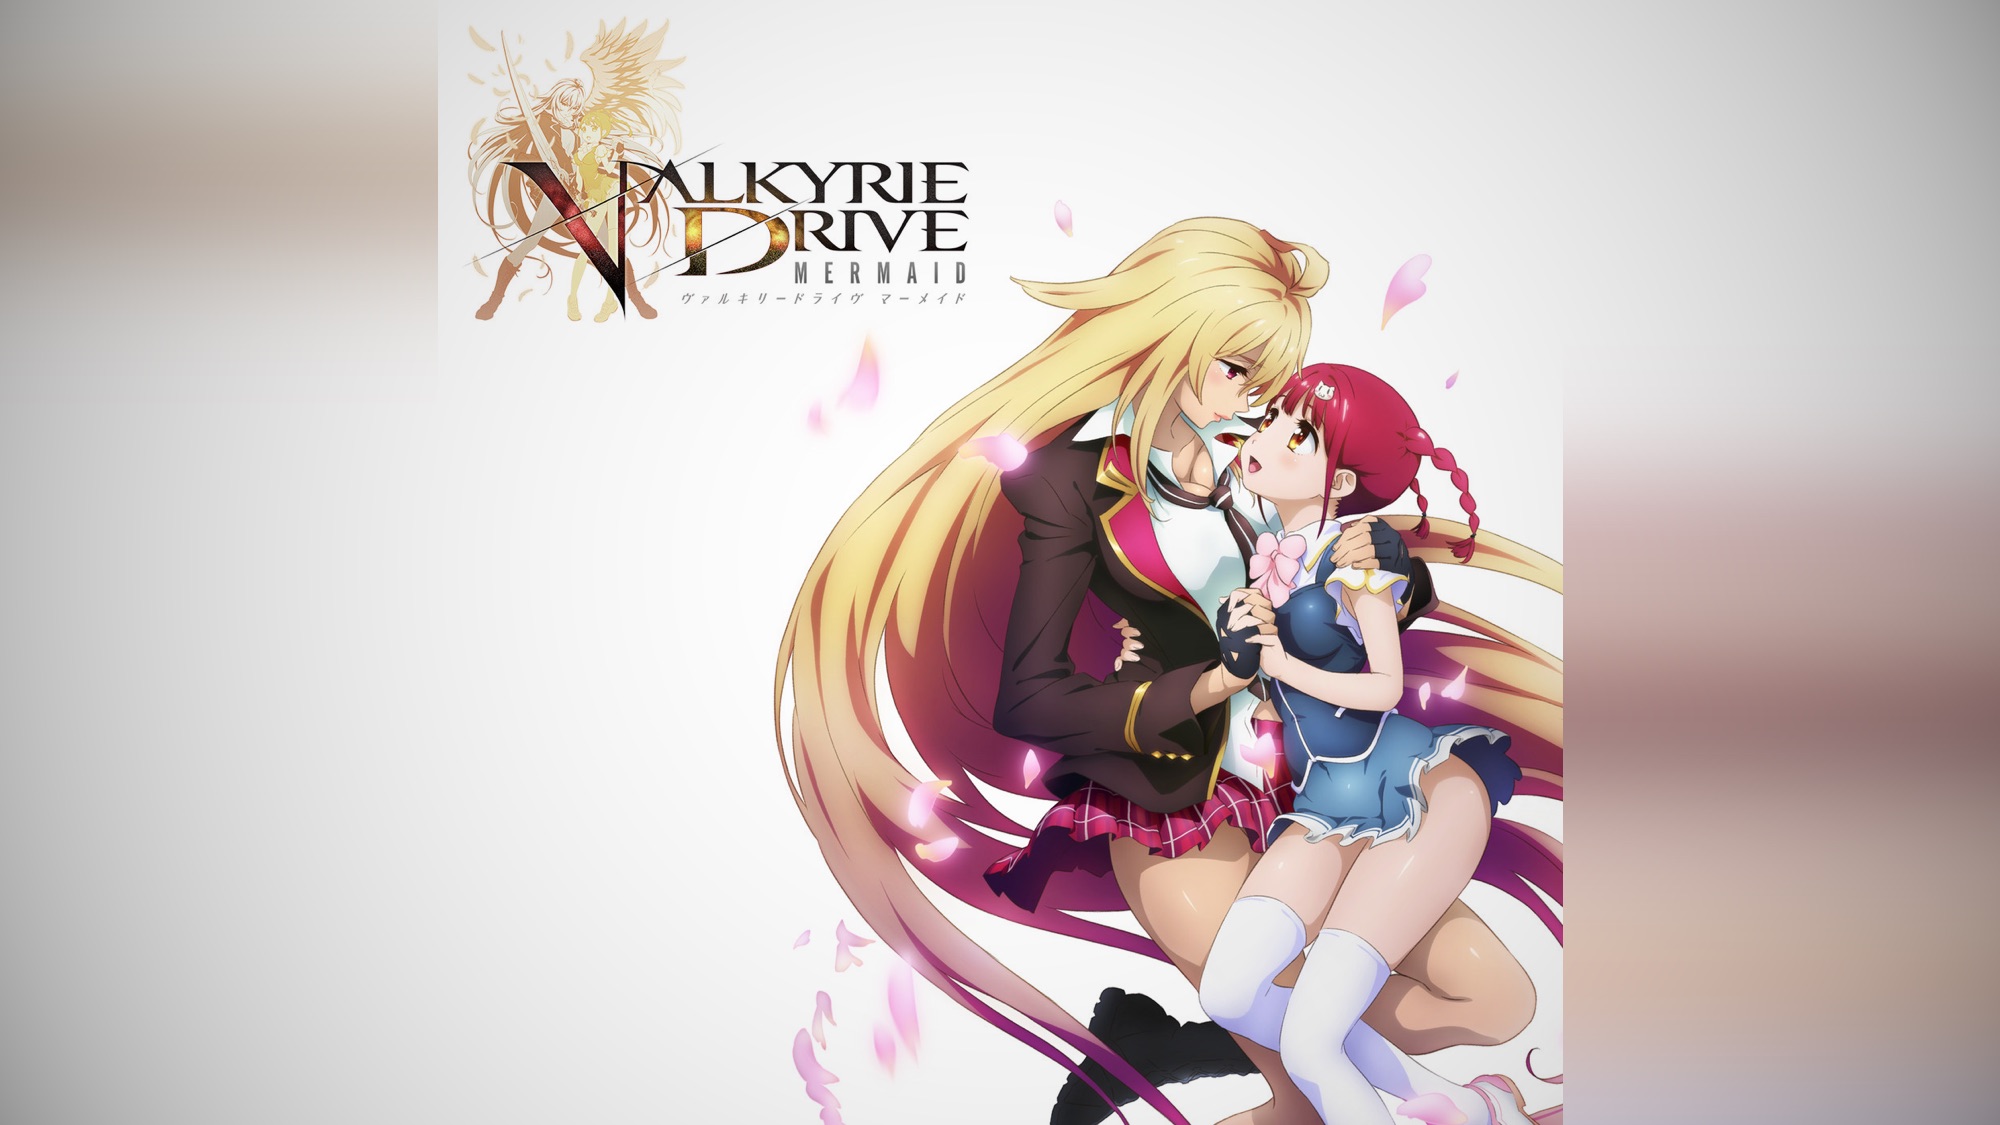 download valkyrie drive mermaid game for free